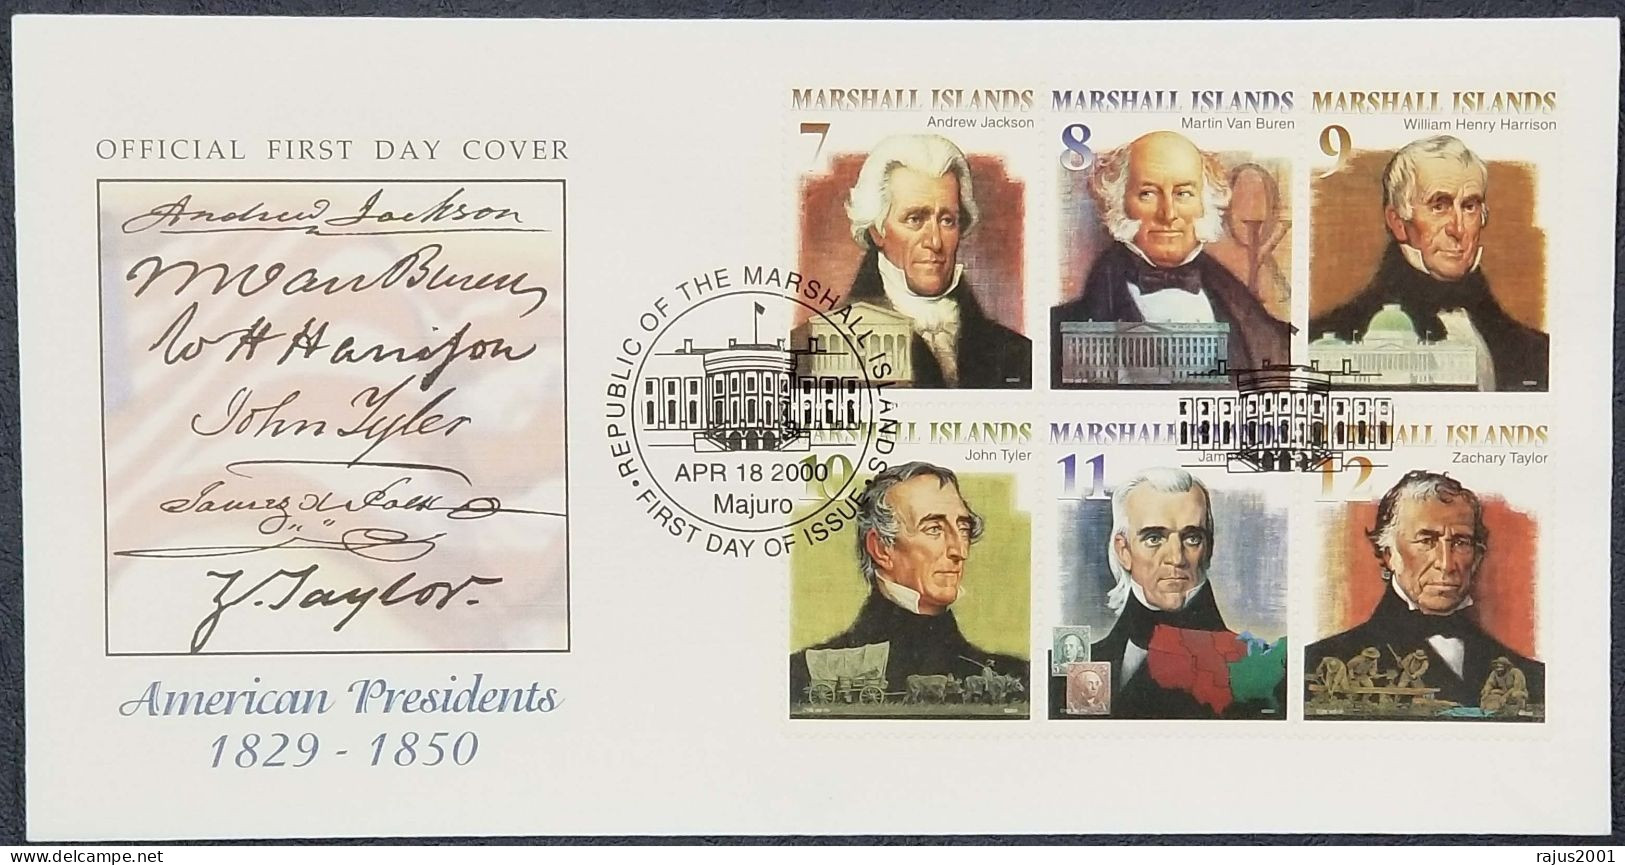 American Presidents, USS Constitution, Andrew, Henry, Tyler, All Presidents Printed  Autograph Marshall Island FDC 2000 - Marshallinseln